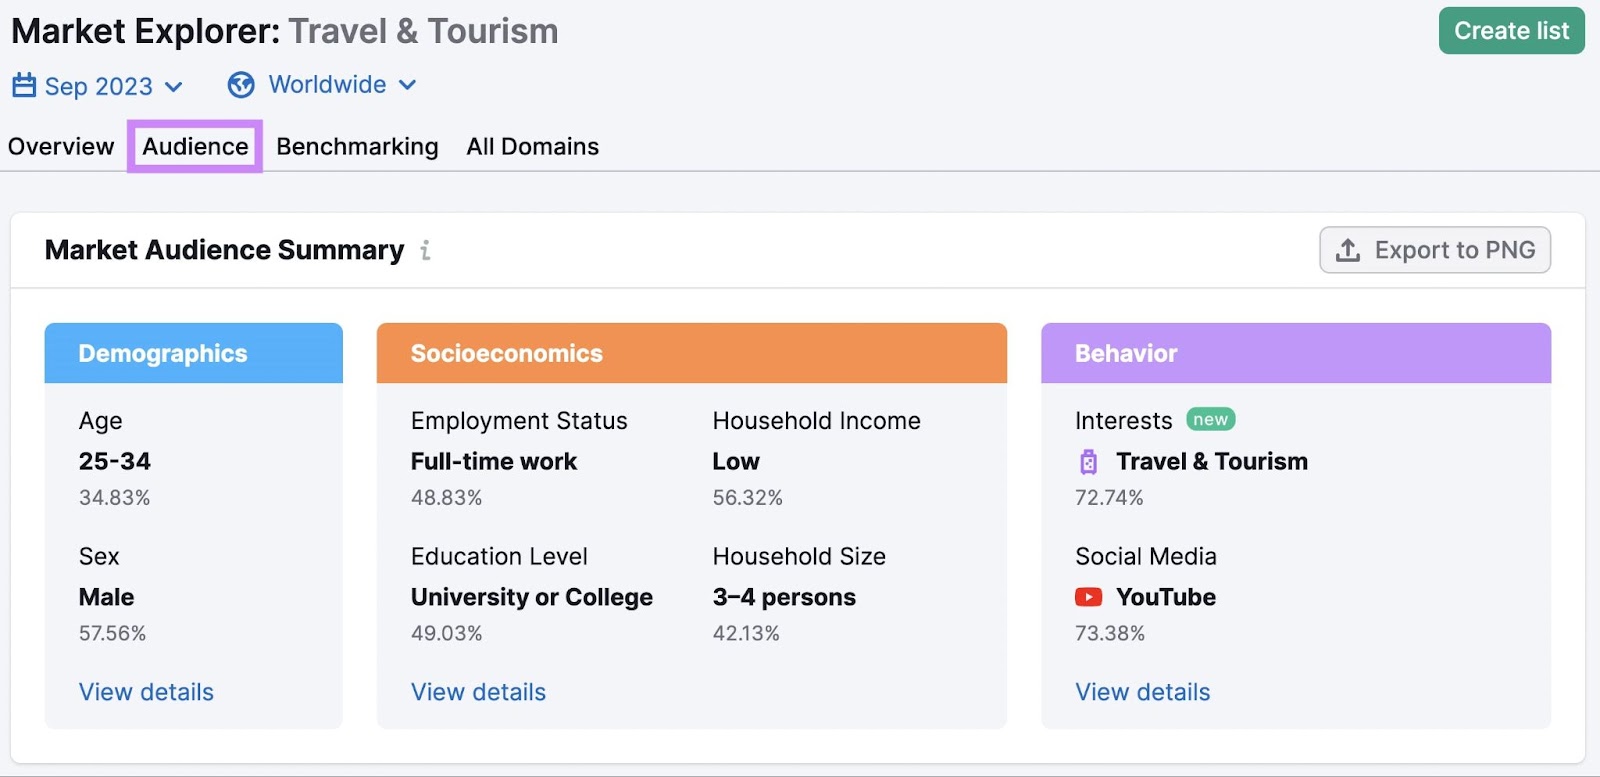 “Market Audience Summary” section for "Travel & Tourism" industry in Market Explorer tool